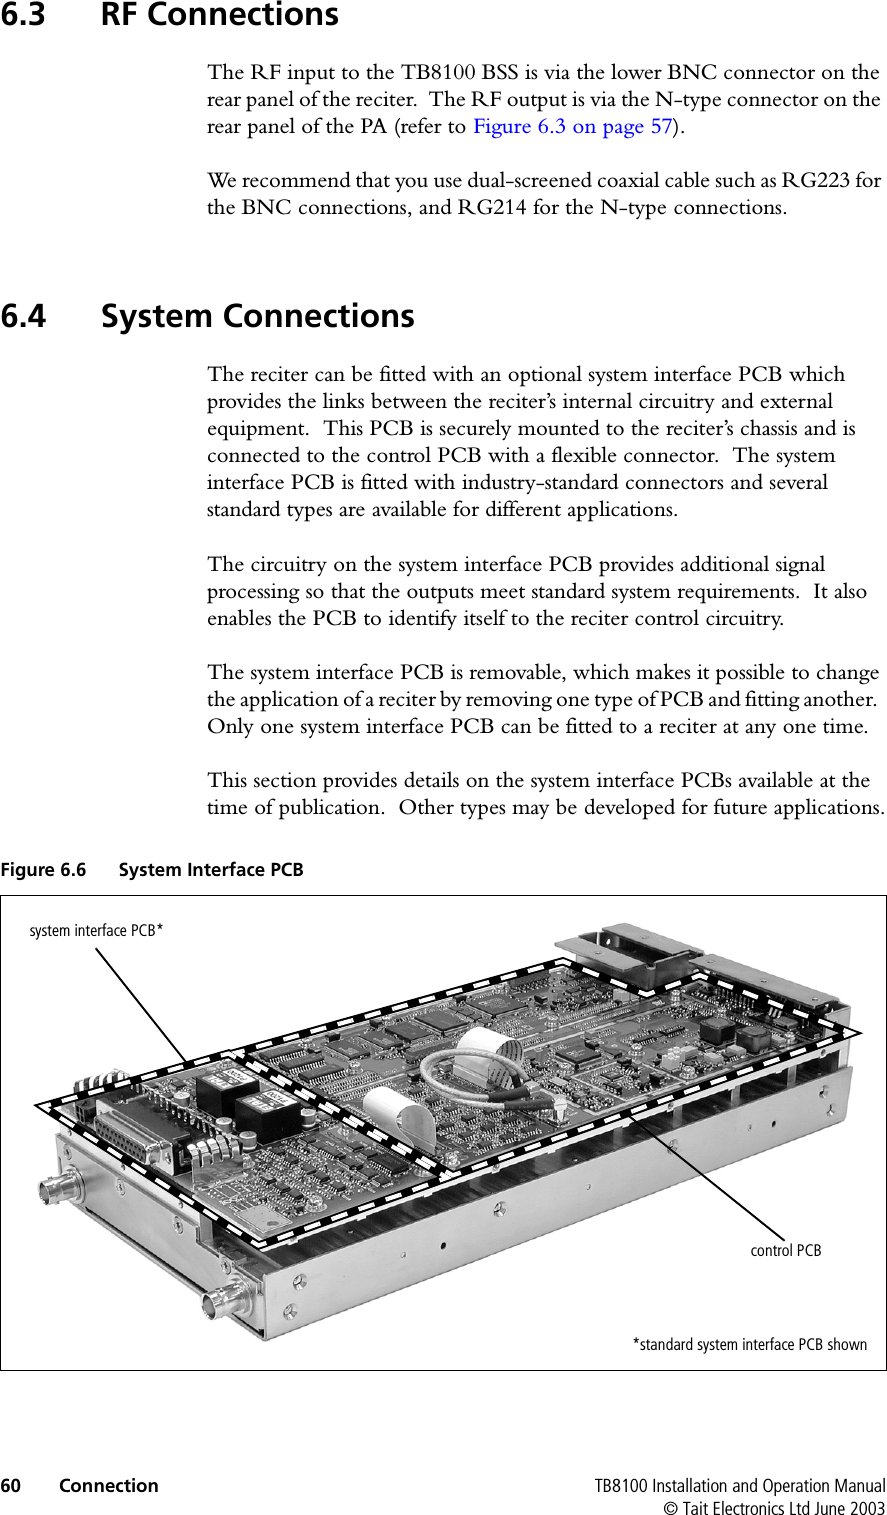  60 Connection TB8100 Installation and Operation Manual© Tait Electronics Ltd June 20036.3 RF ConnectionsThe RF input to the TB8100 BSS is via the lower BNC connector on the rear panel of the reciter.  The RF output is via the N-type connector on the rear panel of the PA (refer to Figure 6.3 on page 57).We recommend that you use dual-screened coaxial cable such as RG223 for the BNC connections, and RG214 for the N-type connections.6.4 System ConnectionsThe reciter can be fitted with an optional system interface PCB which provides the links between the reciter’s internal circuitry and external equipment.  This PCB is securely mounted to the reciter’s chassis and is connected to the control PCB with a flexible connector.  The system interface PCB is fitted with industry-standard connectors and several standard types are available for different applications.The circuitry on the system interface PCB provides additional signal processing so that the outputs meet standard system requirements.  It also enables the PCB to identify itself to the reciter control circuitry.The system interface PCB is removable, which makes it possible to change the application of a reciter by removing one type of PCB and fitting another.  Only one system interface PCB can be fitted to a reciter at any one time.This section provides details on the system interface PCBs available at the time of publication.  Other types may be developed for future applications.Figure 6.6 System Interface PCBsystem interface PCB*control PCB*standard system interface PCB shown